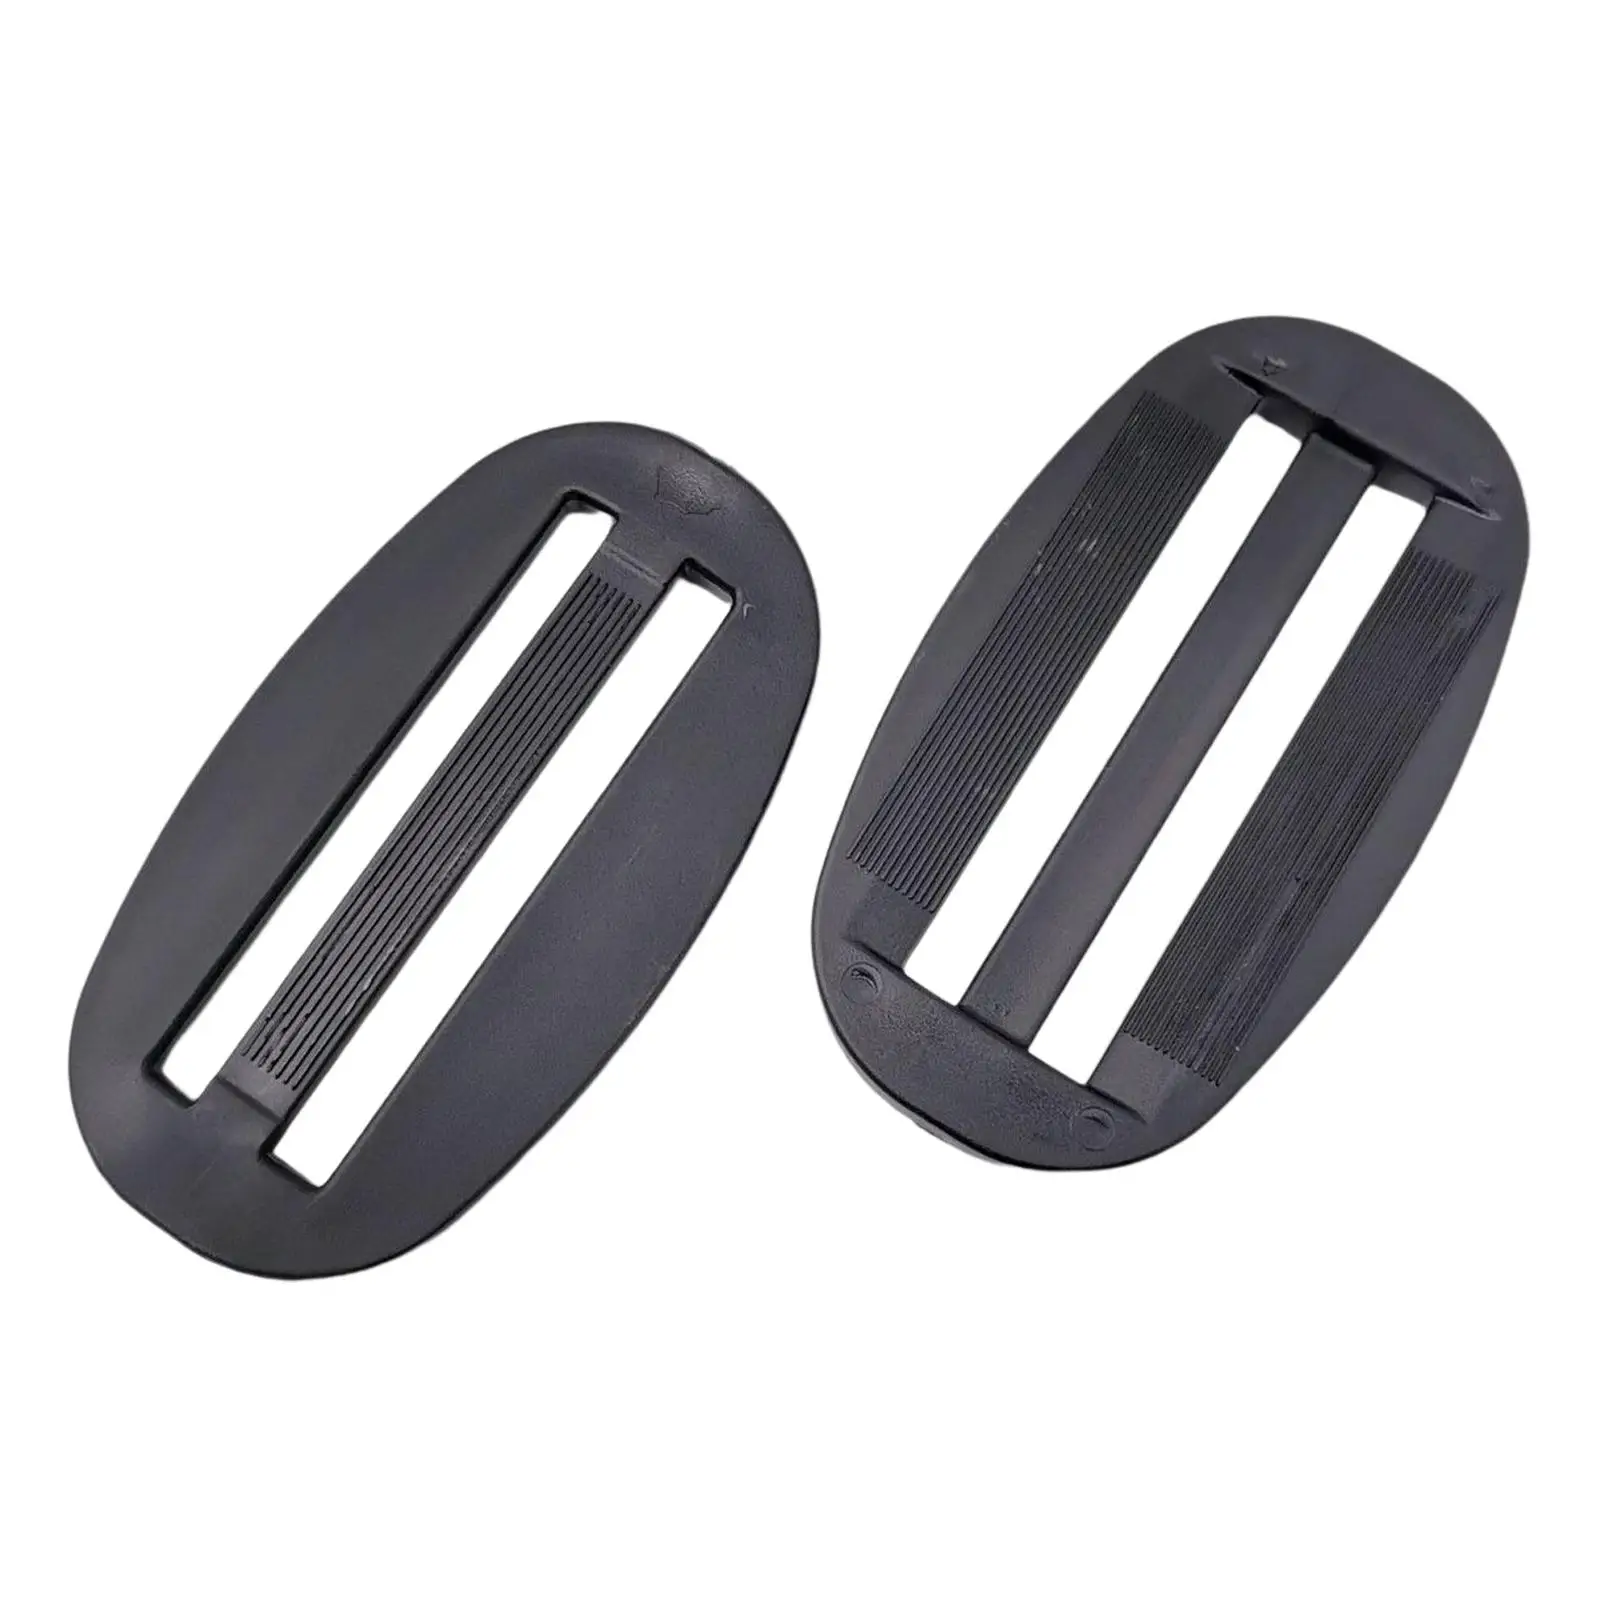 2x Slide Buckle Dive Strap Fixing Water Sports BCD Glider Scuba Diving Weight Belt Webbing Keeper for Harness BCD Accessories